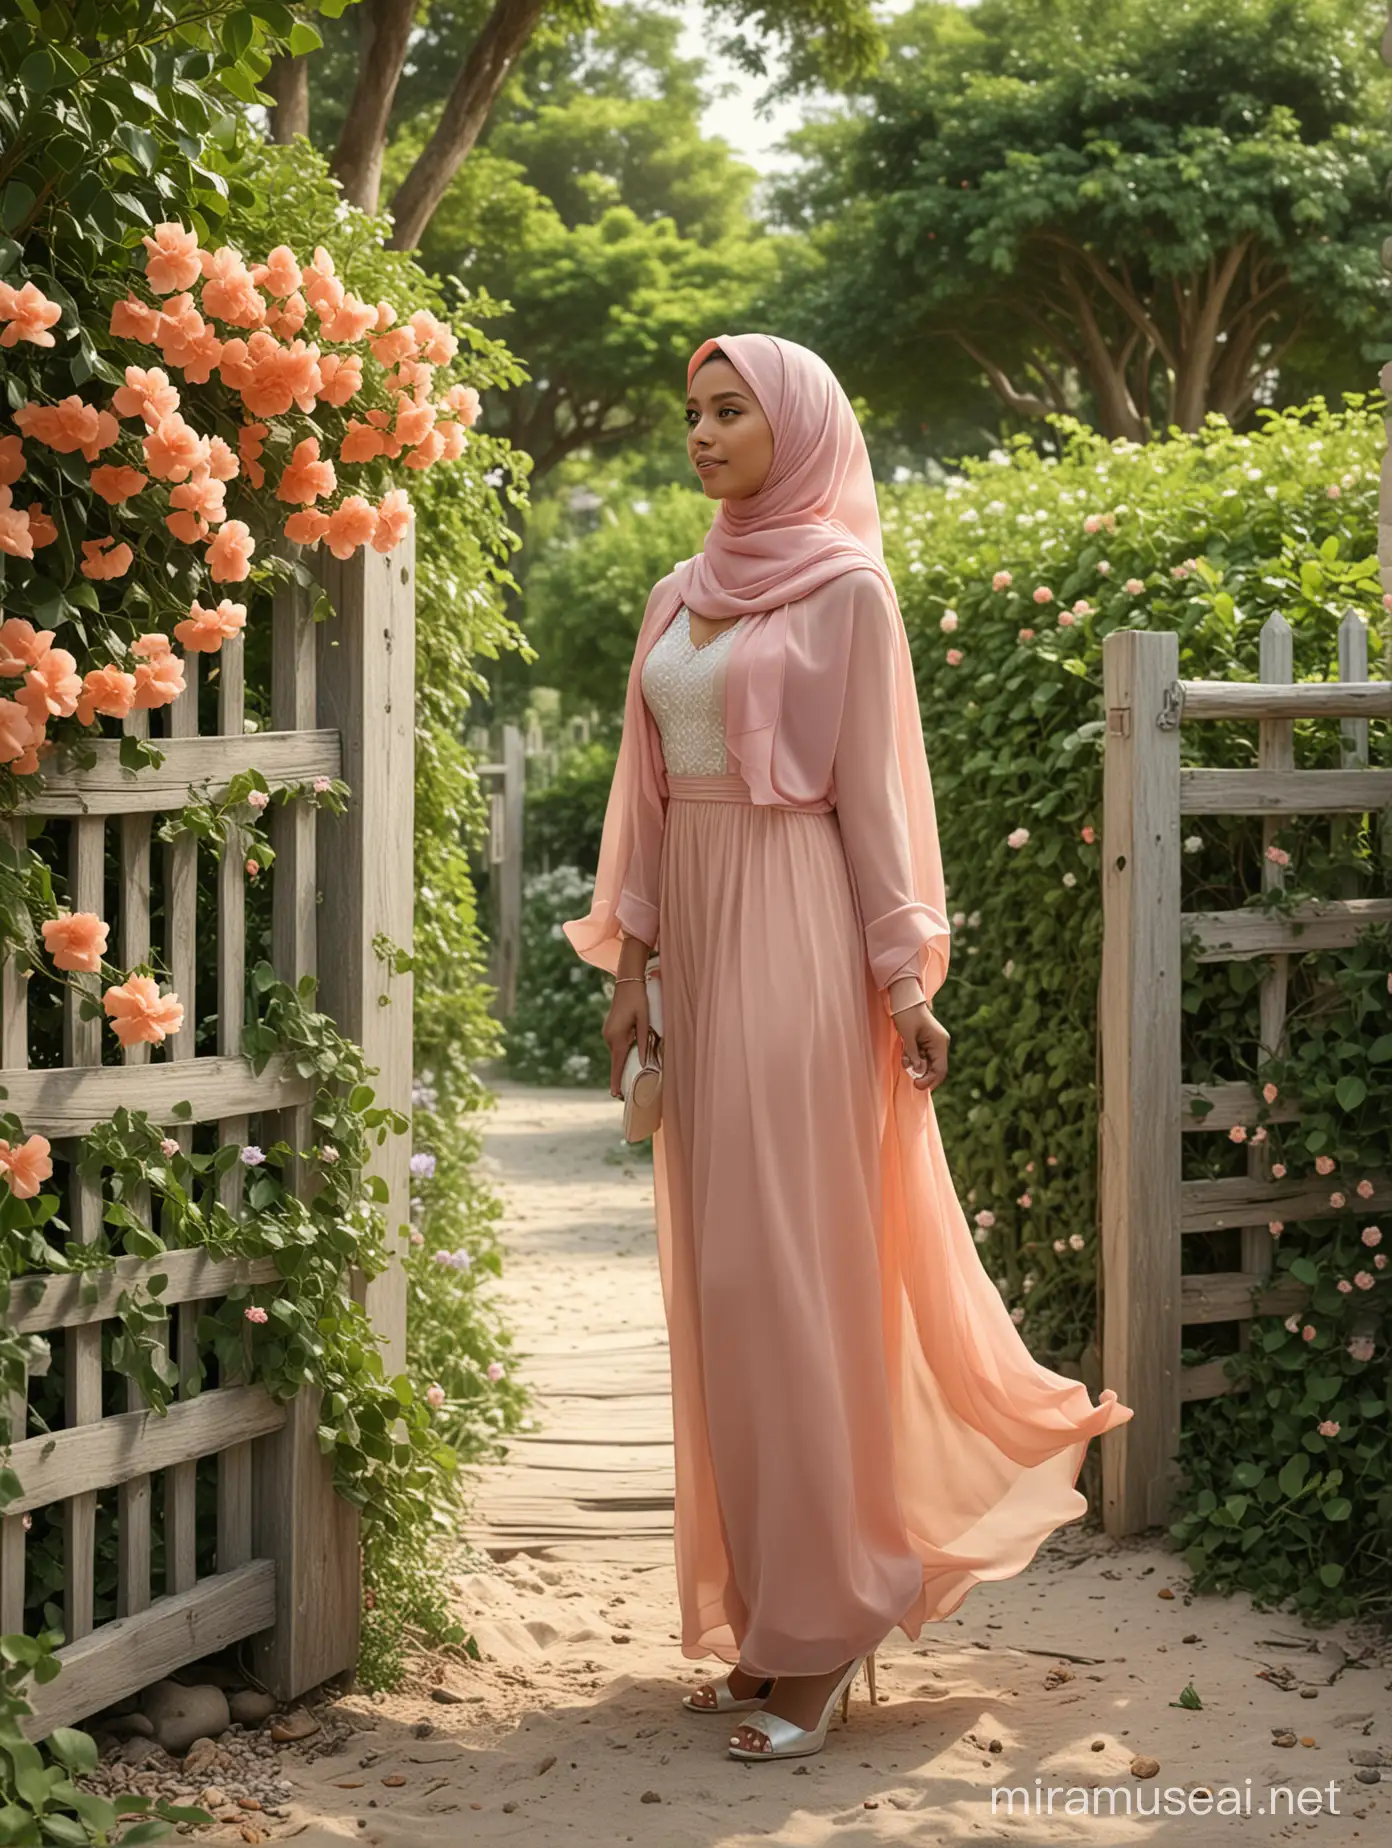 Produce a very realistic, 3D, HDR, tele lens view, generate a side view of a beautiful Malay female, wear bright peach shawl hijab, wearing a lavender chiffon layered dress, white clutch evening bag, white heels, walking through a wooden gate into a private beach, with ivy, tall flowers, green trees, muted tones